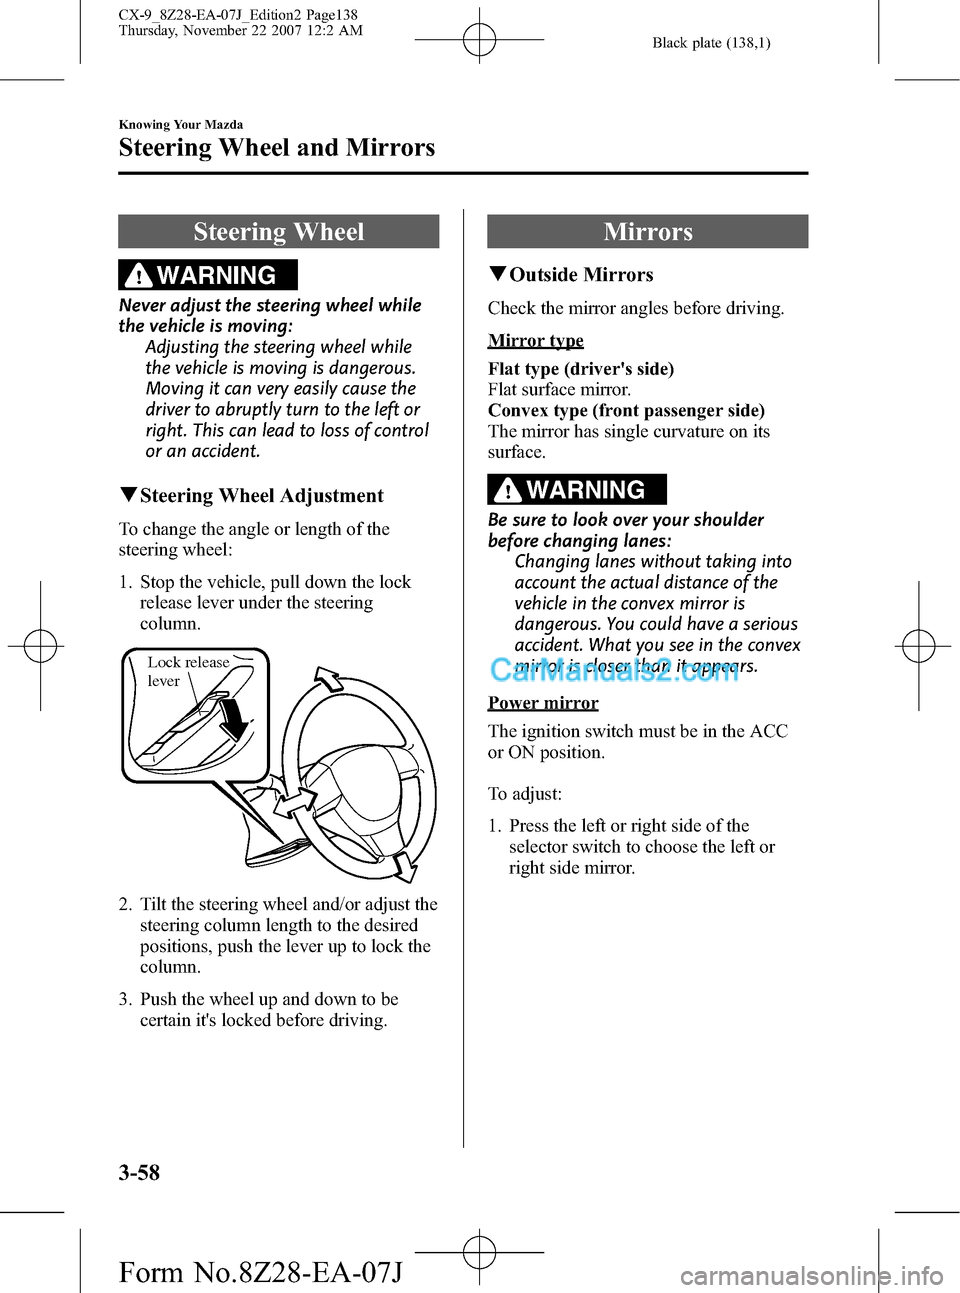 MAZDA MODEL CX-9 2008  Owners Manual (in English) Black plate (138,1)
Steering Wheel
WARNING
Never adjust the steering wheel while
the vehicle is moving:
Adjusting the steering wheel while
the vehicle is moving is dangerous.
Moving it can very easily